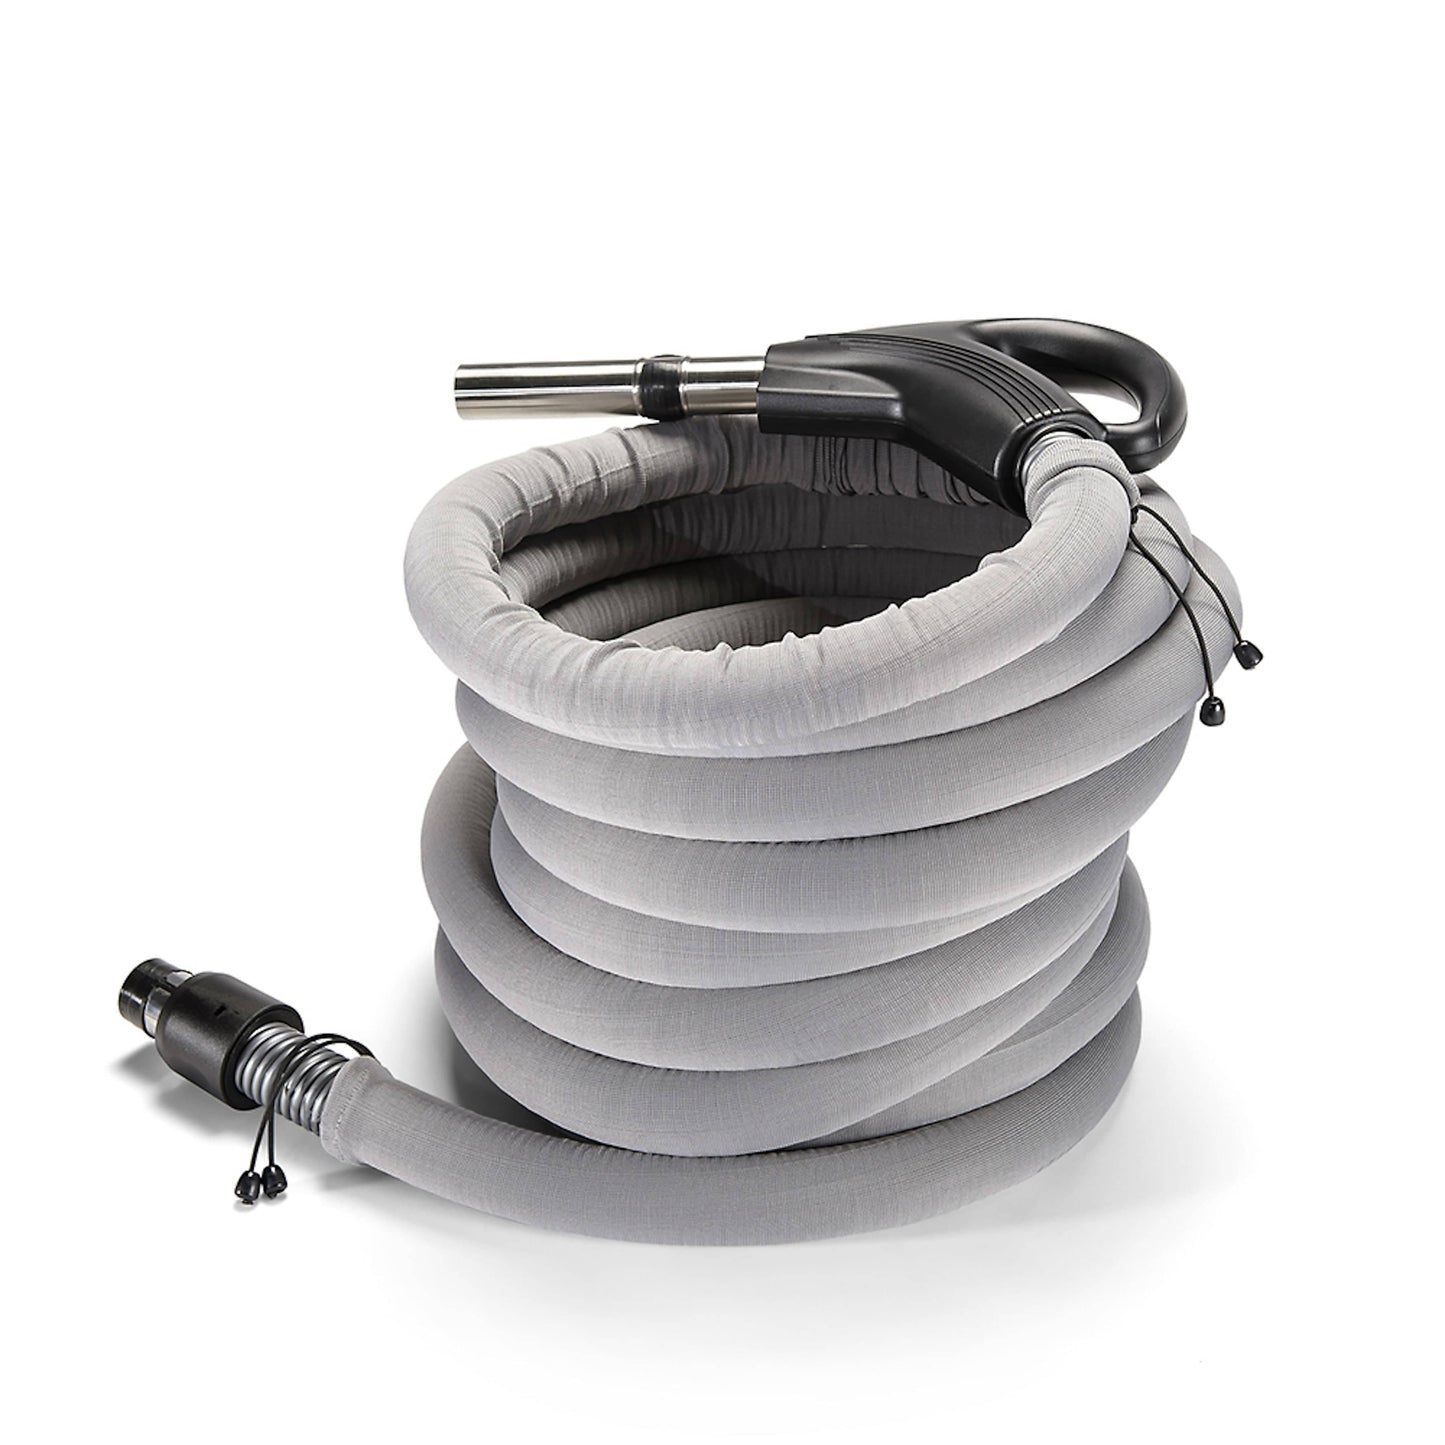 Universal Central Vacuum Hose Kit with Milti Surface Floor Tools by Prolux